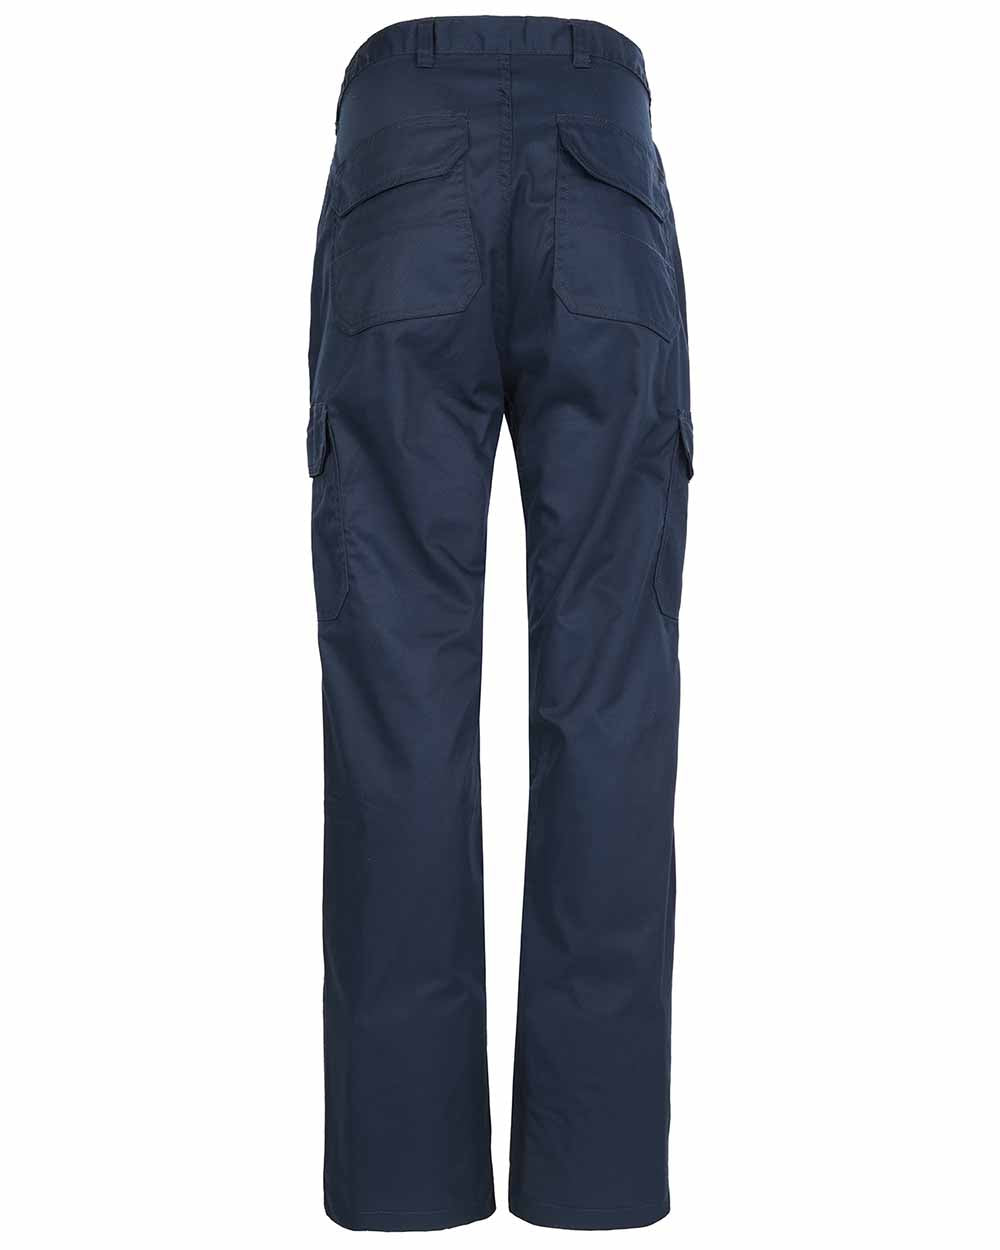 Navy coloured Fort Workforce Trousers on white background 